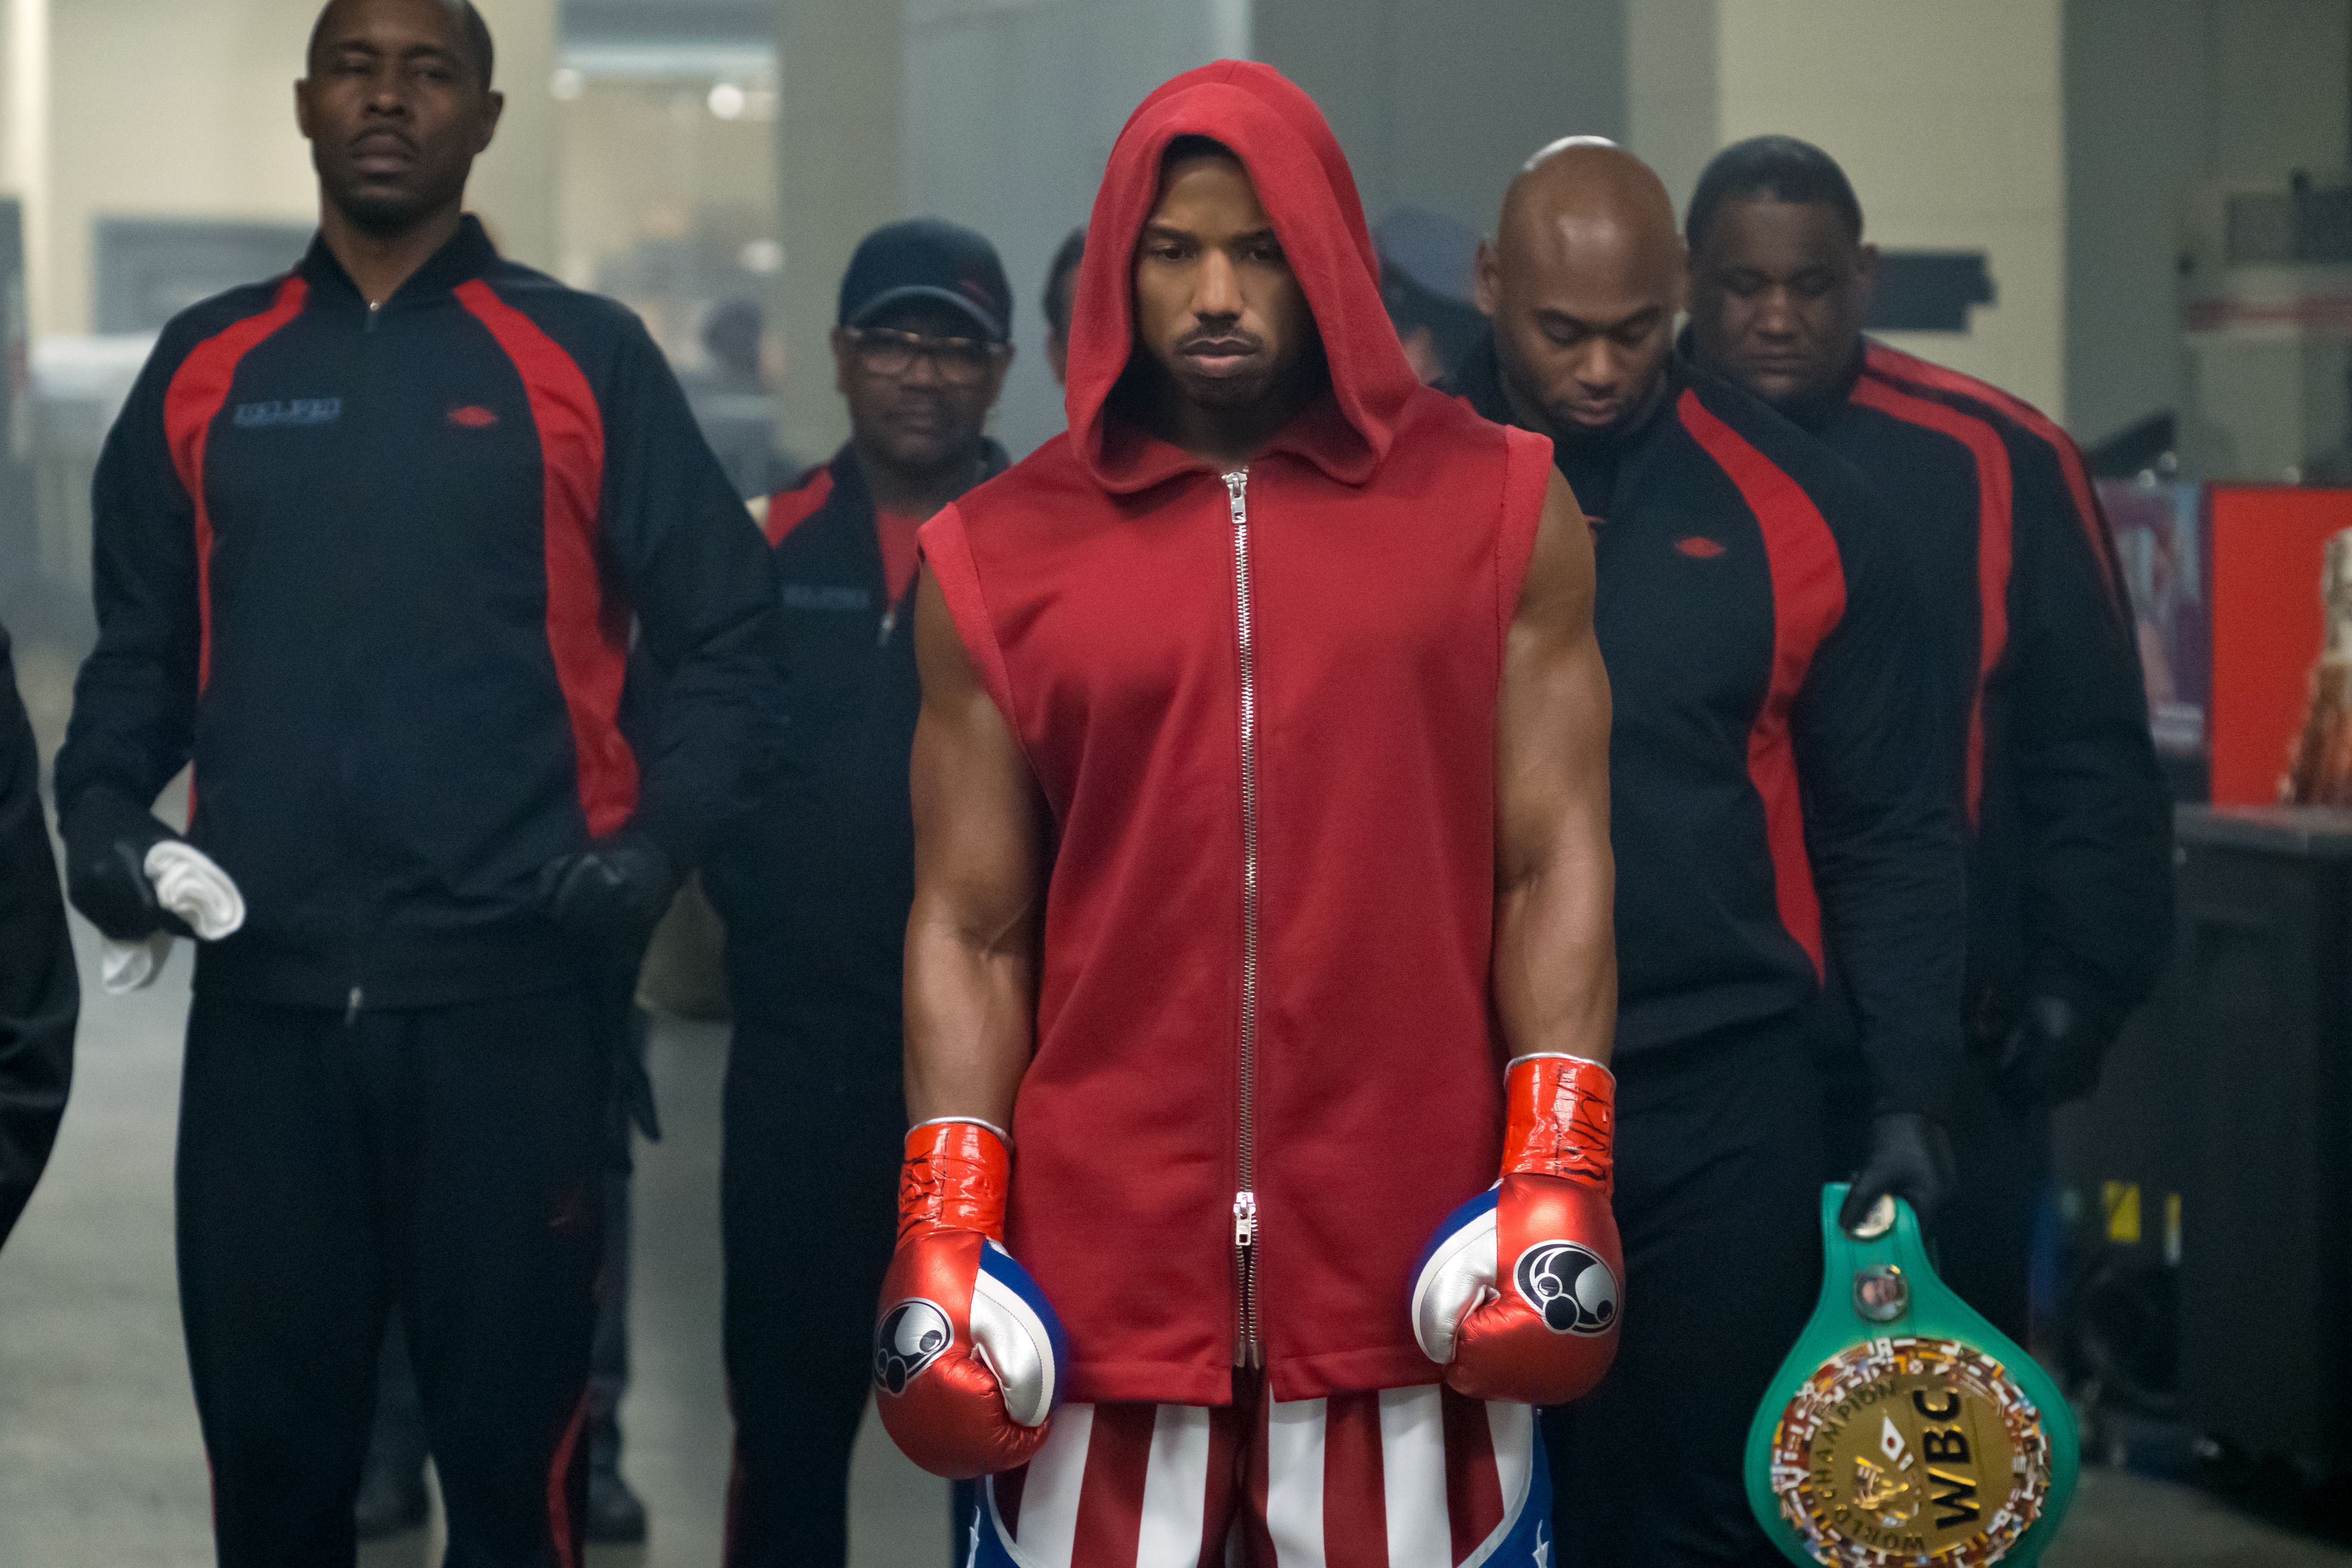 Michael B. Jordan in fighting form with 'Black Panther,' 'Creed II